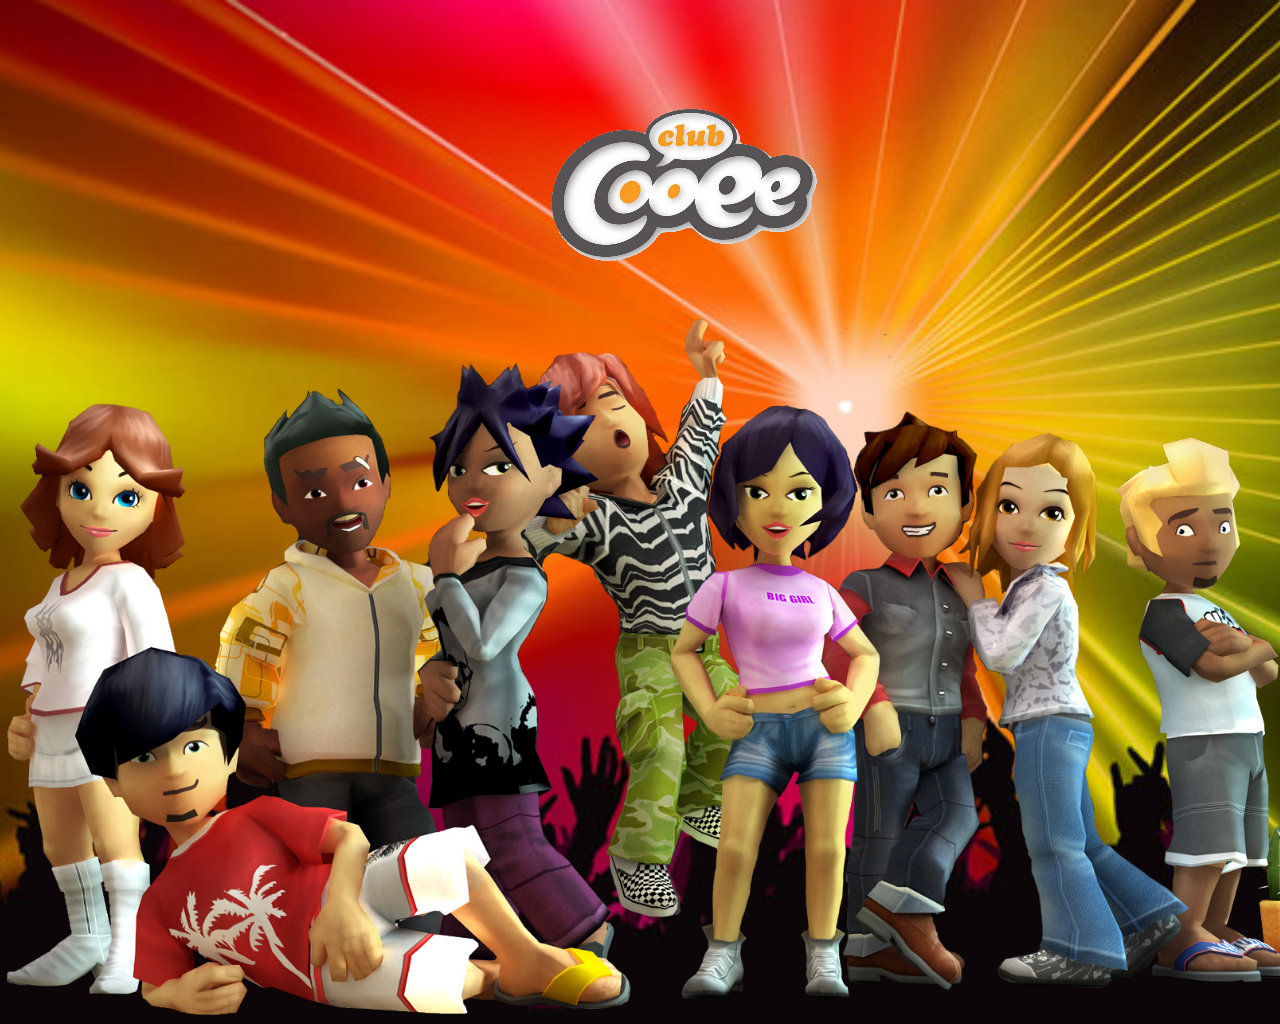 Club Cooee Wallpapers.